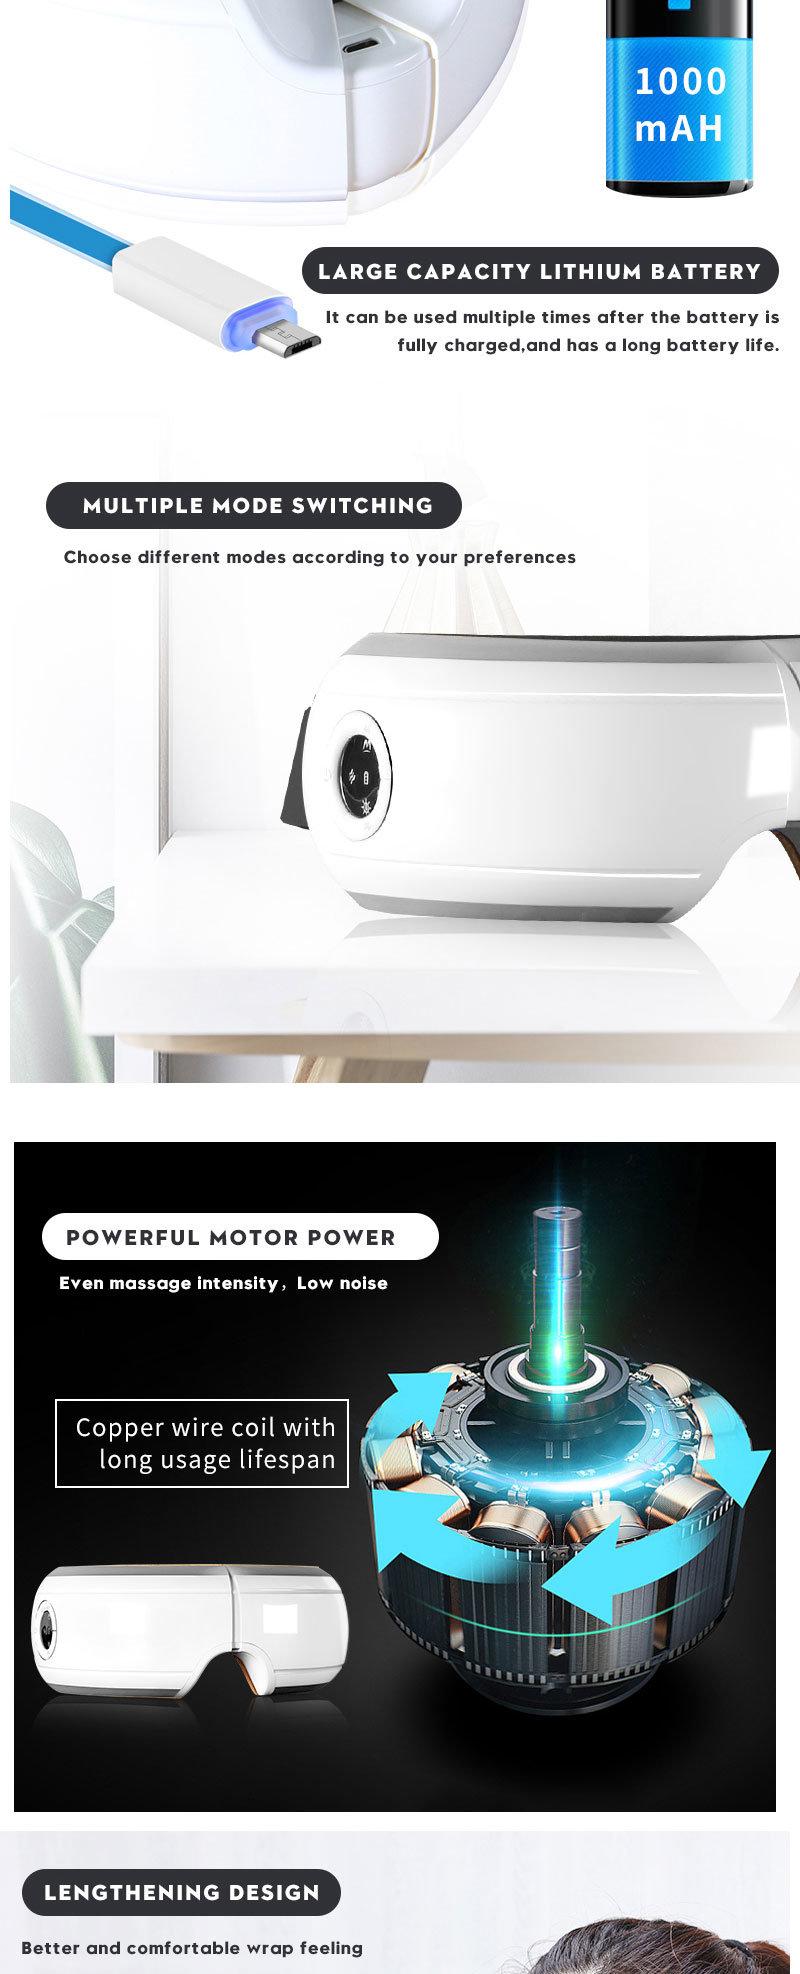 Hezheng Rechargeable Electric Wireless Music Vibrating Care Eye Massager Acupuncture Eye Relaxing Massage Machine